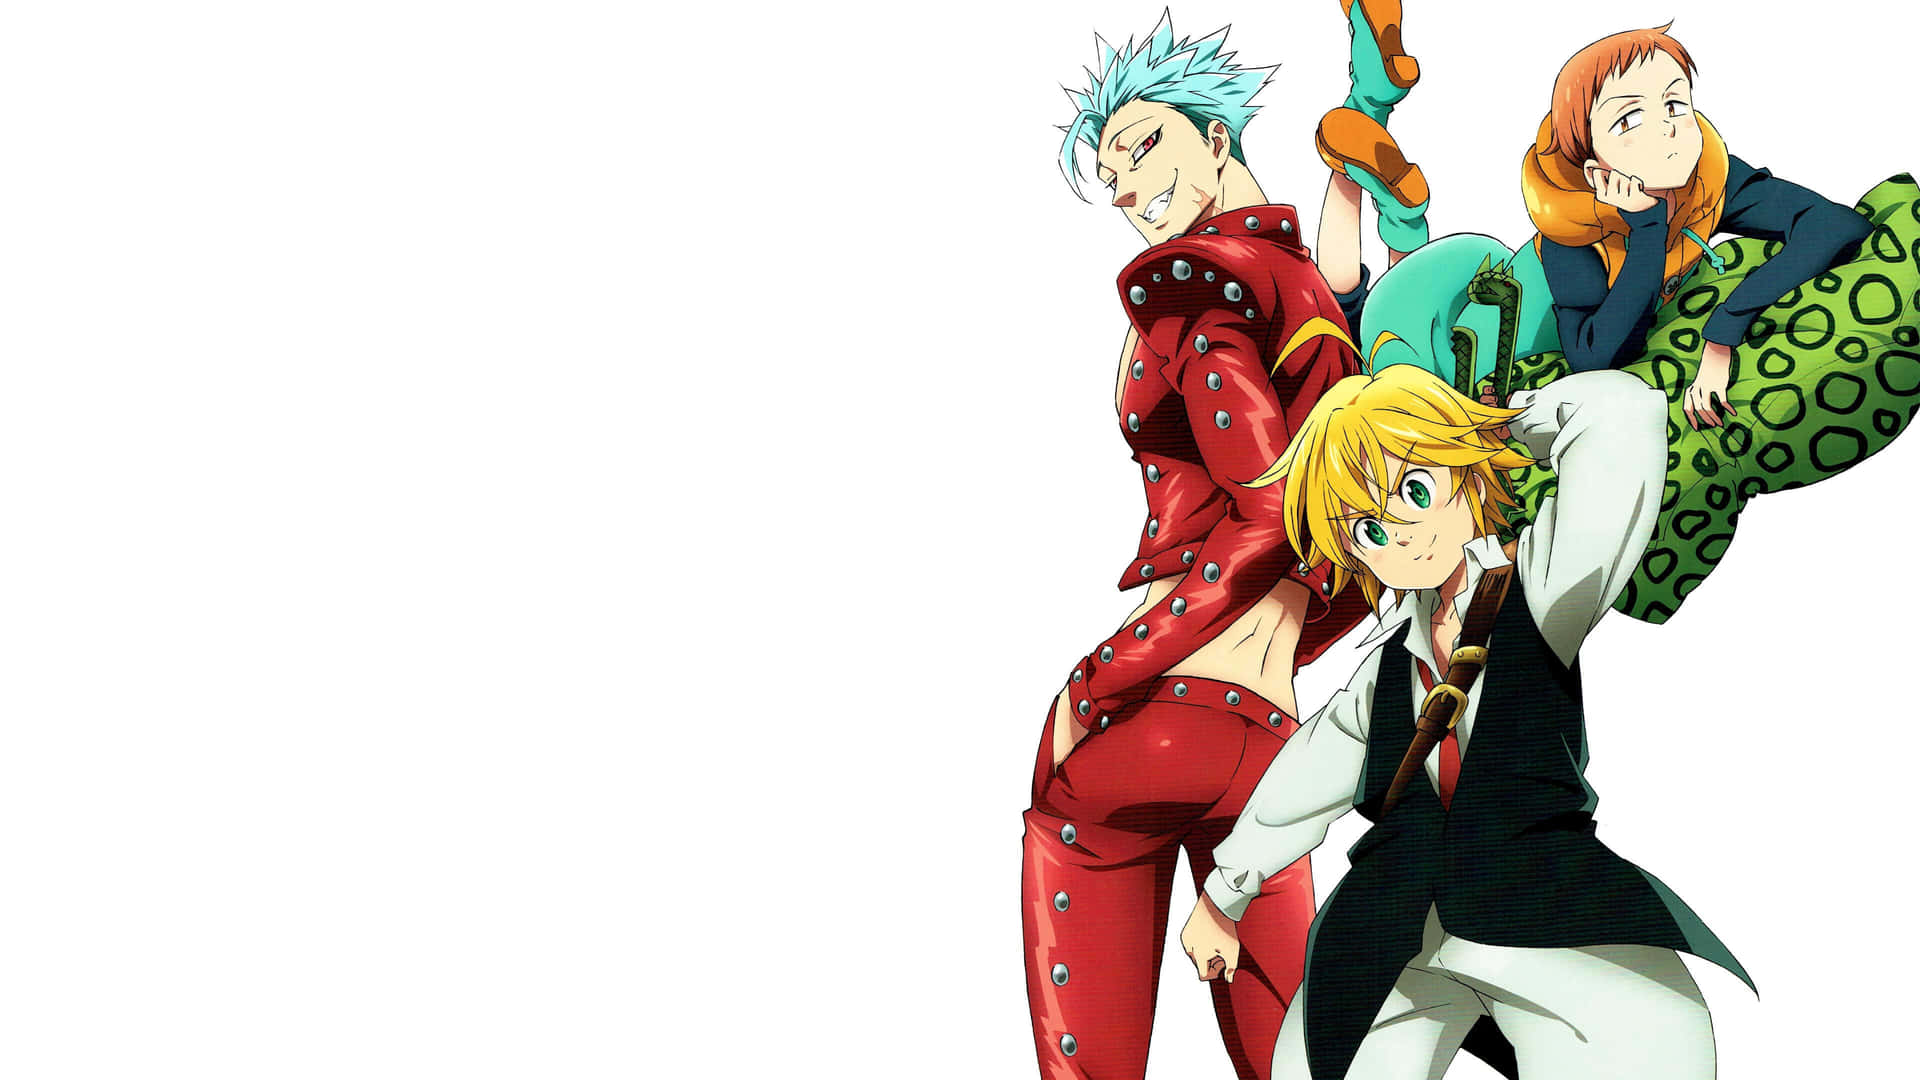 Explore the Seven Deadly Sins in Spectacular 4K Wallpaper